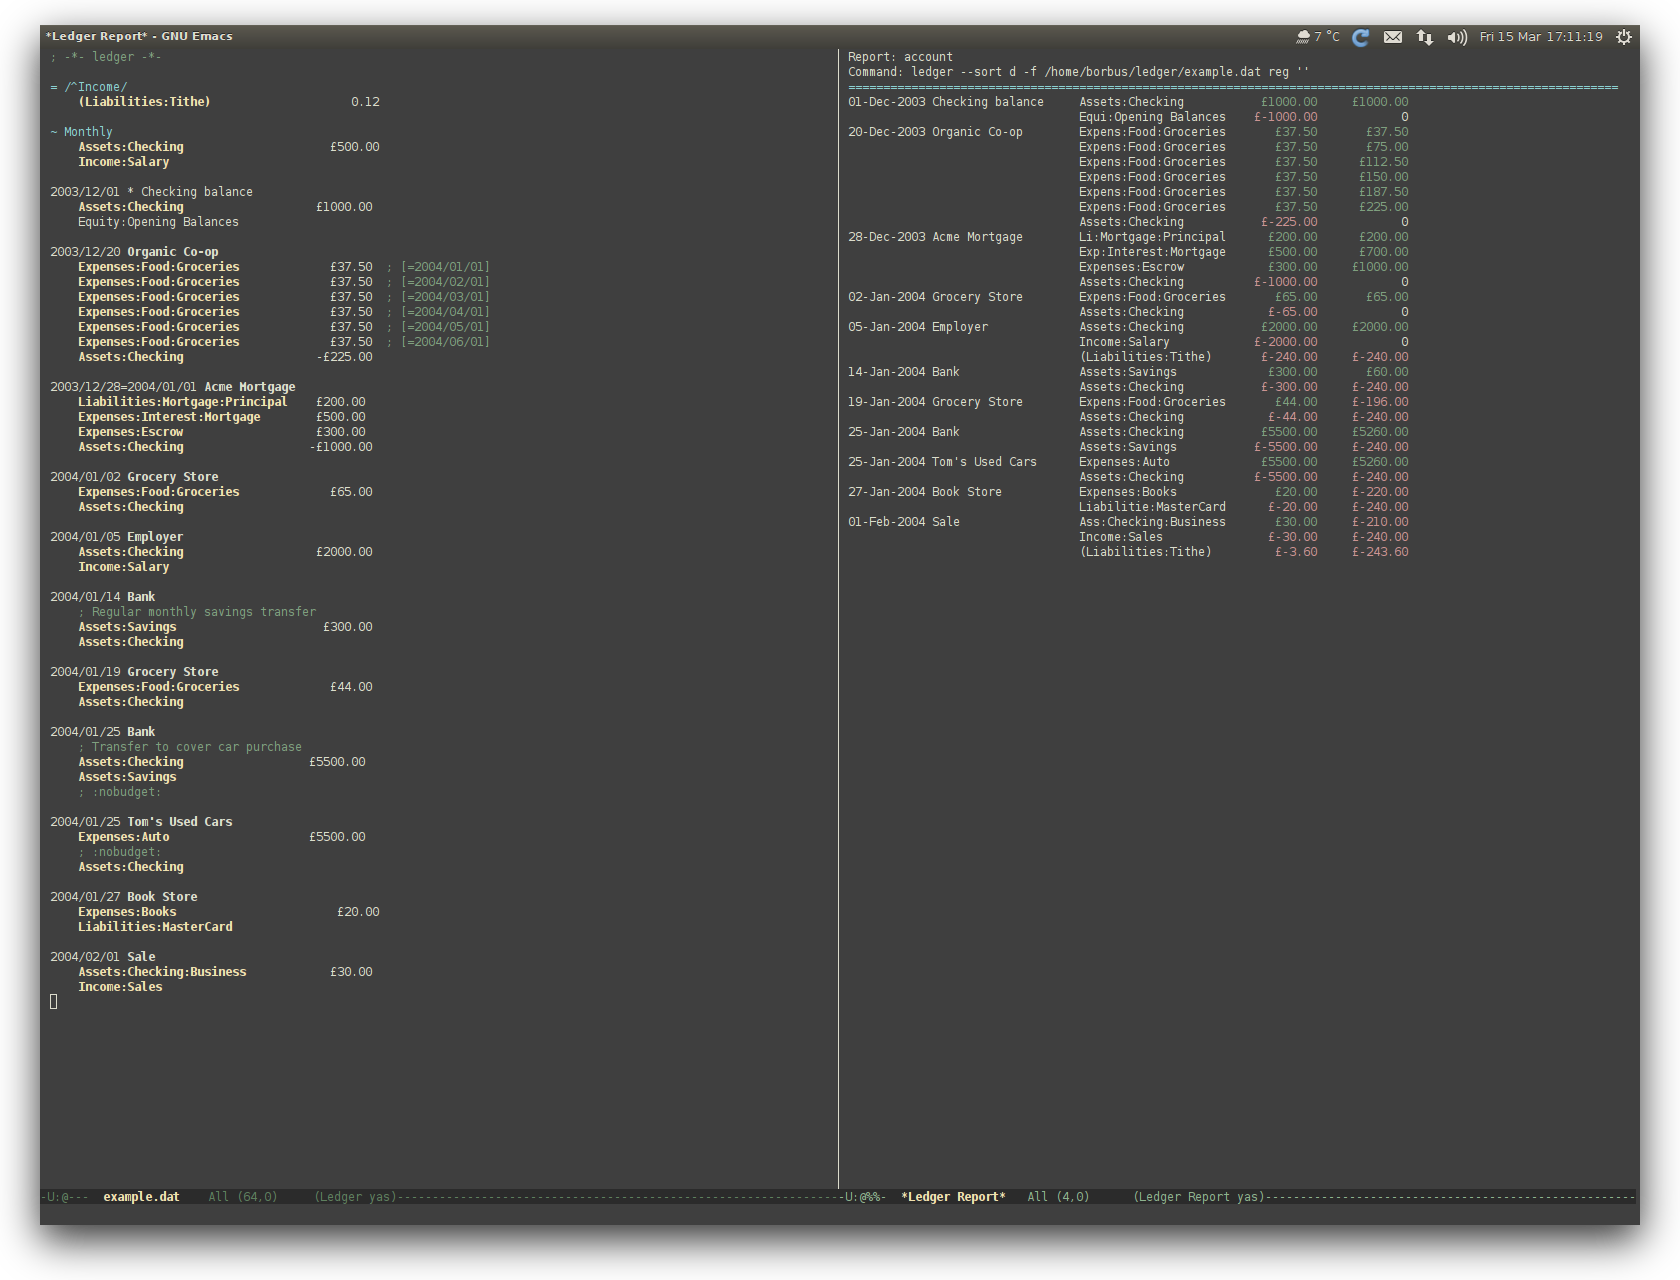 /TakeV/spacemacs/media/commit/1eac4dfc3f7b099264410aff9b7d2d88013fa3bd/layers/+tools/finance/img/ledger.png